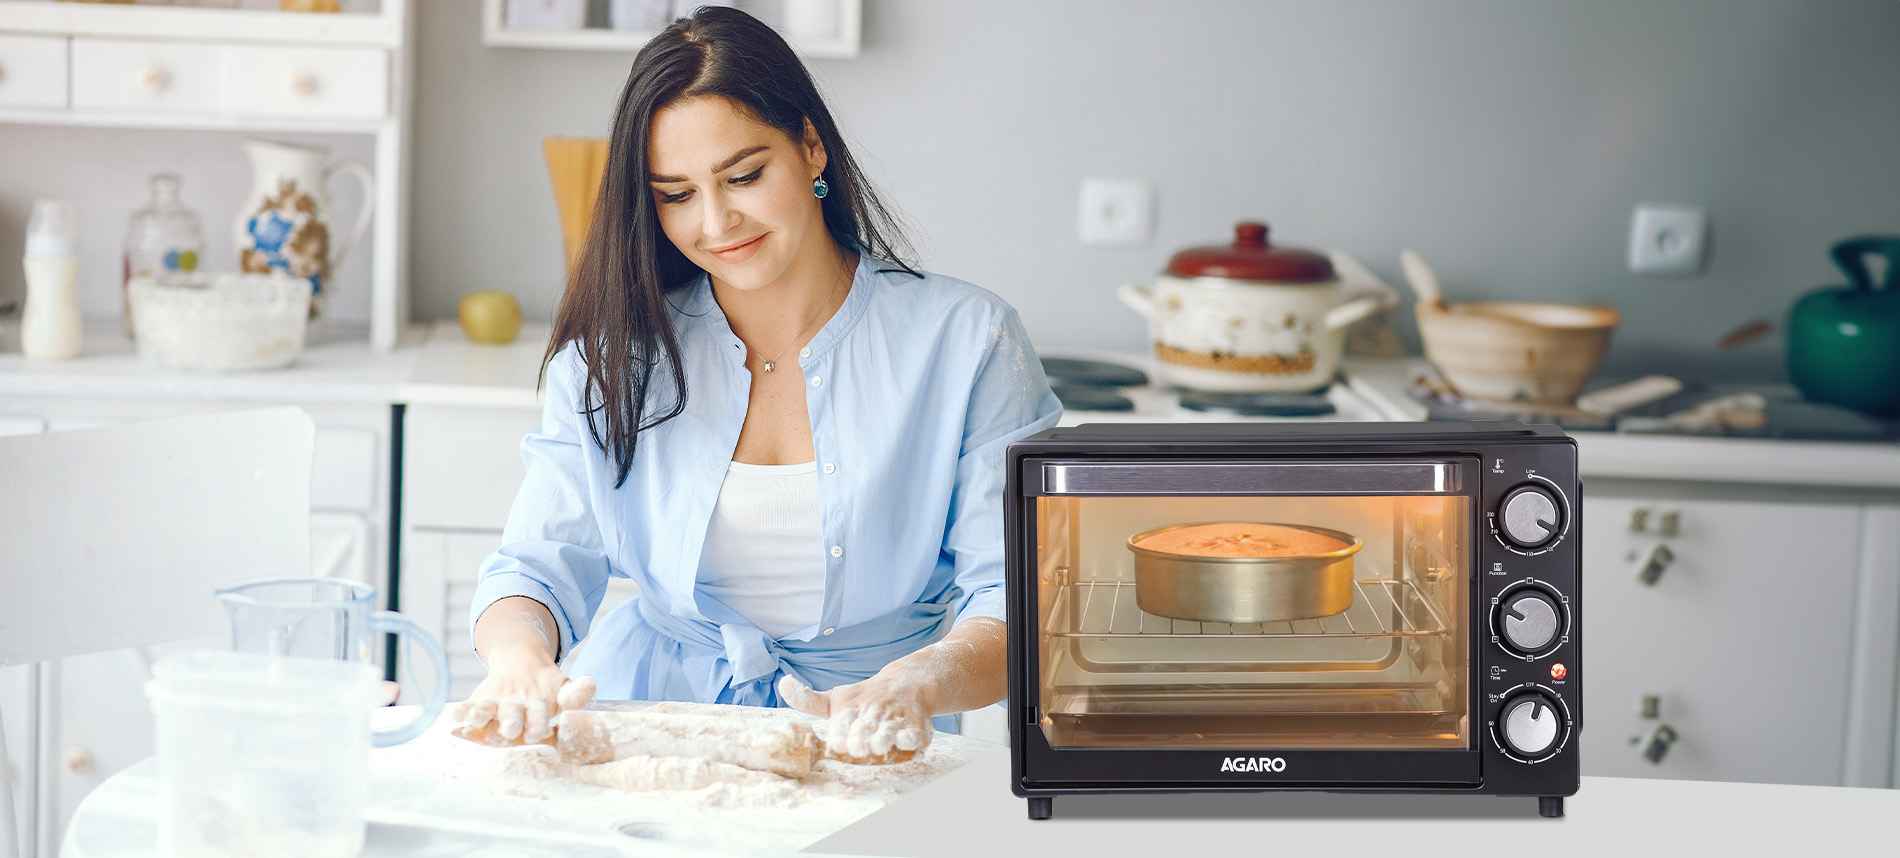 Convection oven vs. traditional oven | King Arthur Baking